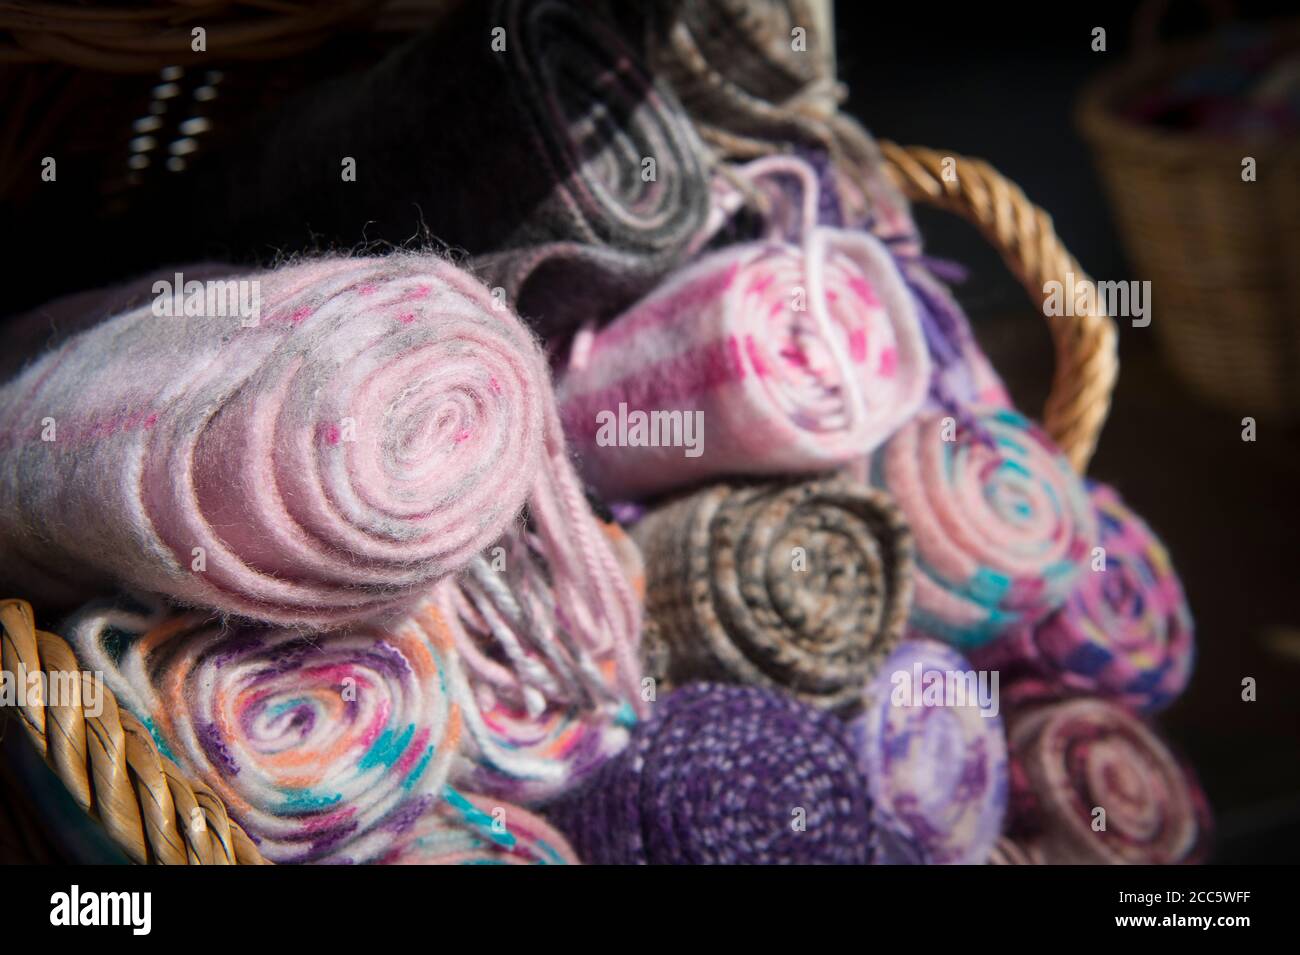 Basket of scarves for sale outside a shop. Stock Photo